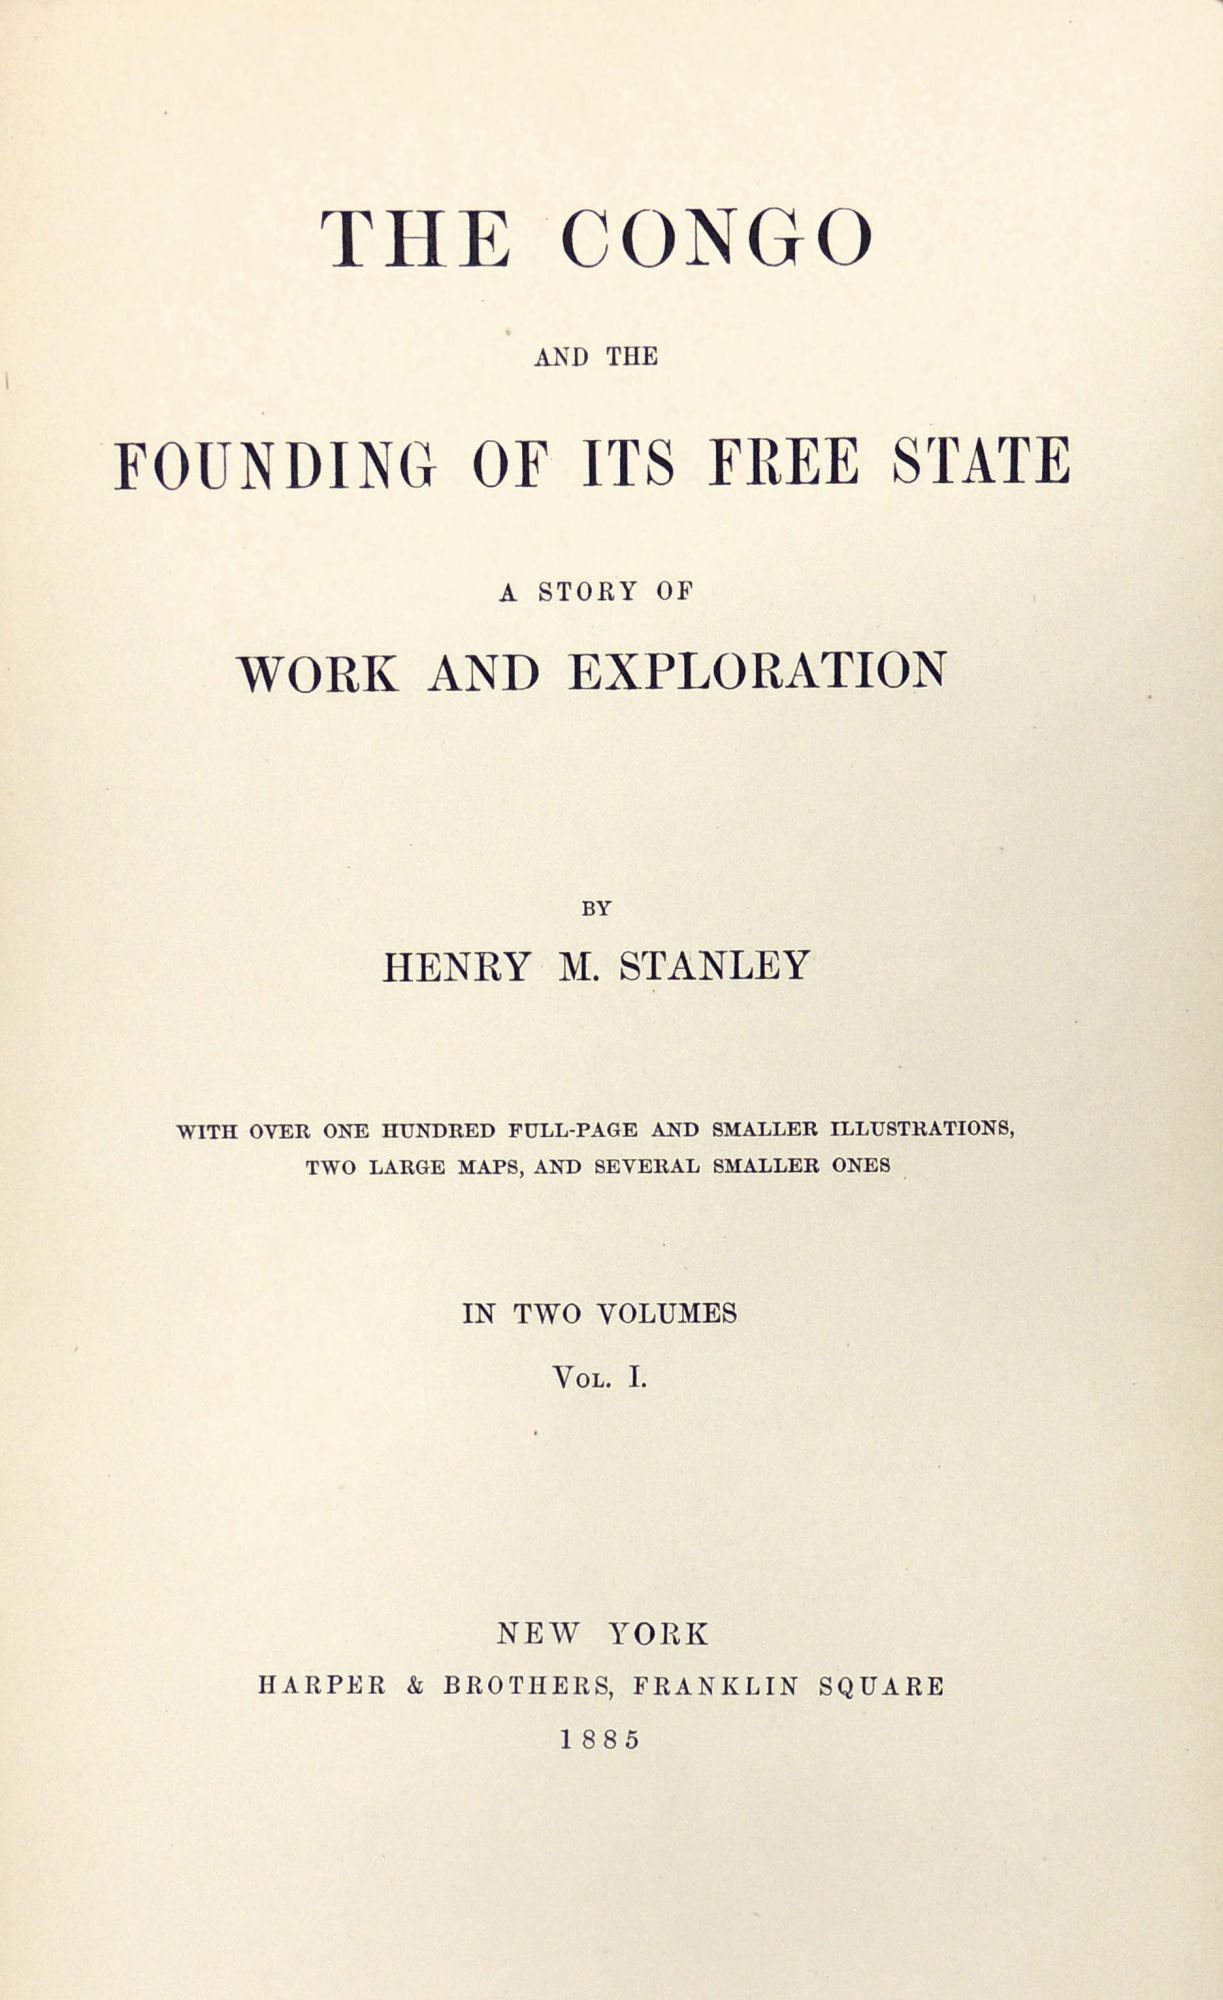 File:Stanley Founding of Congo Free State 185 Kinshassa Station